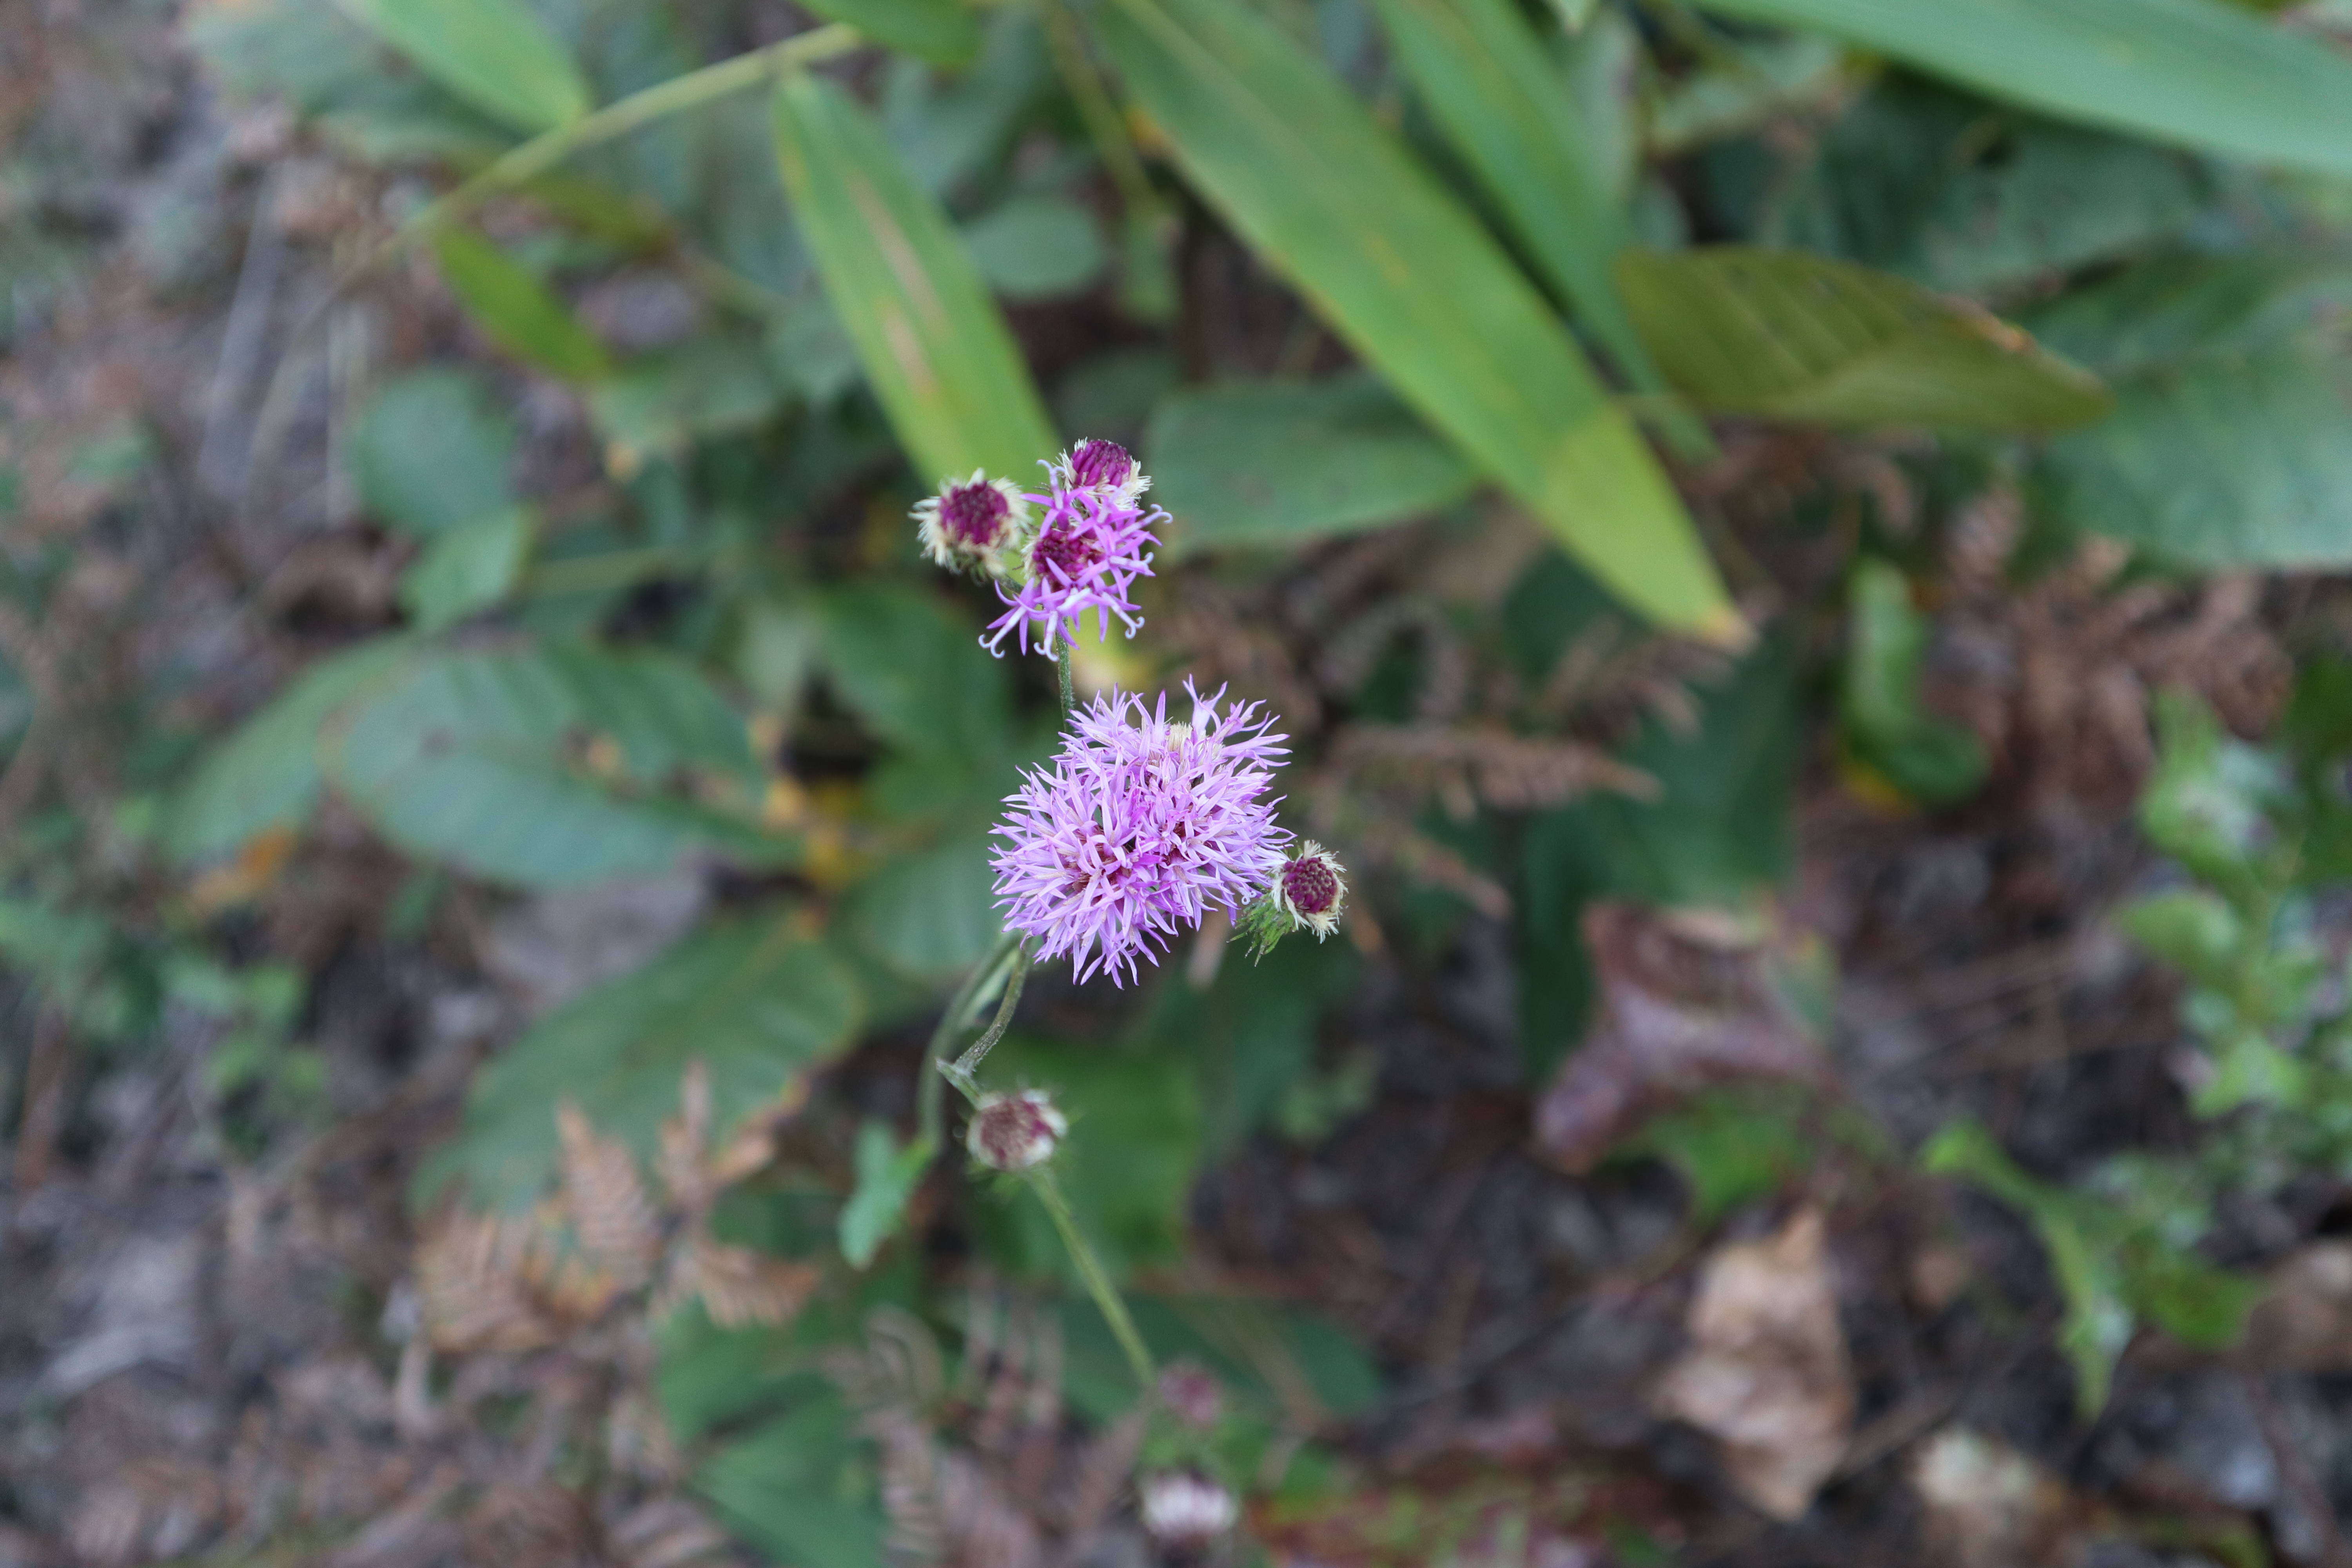 Image of stemless ironweed